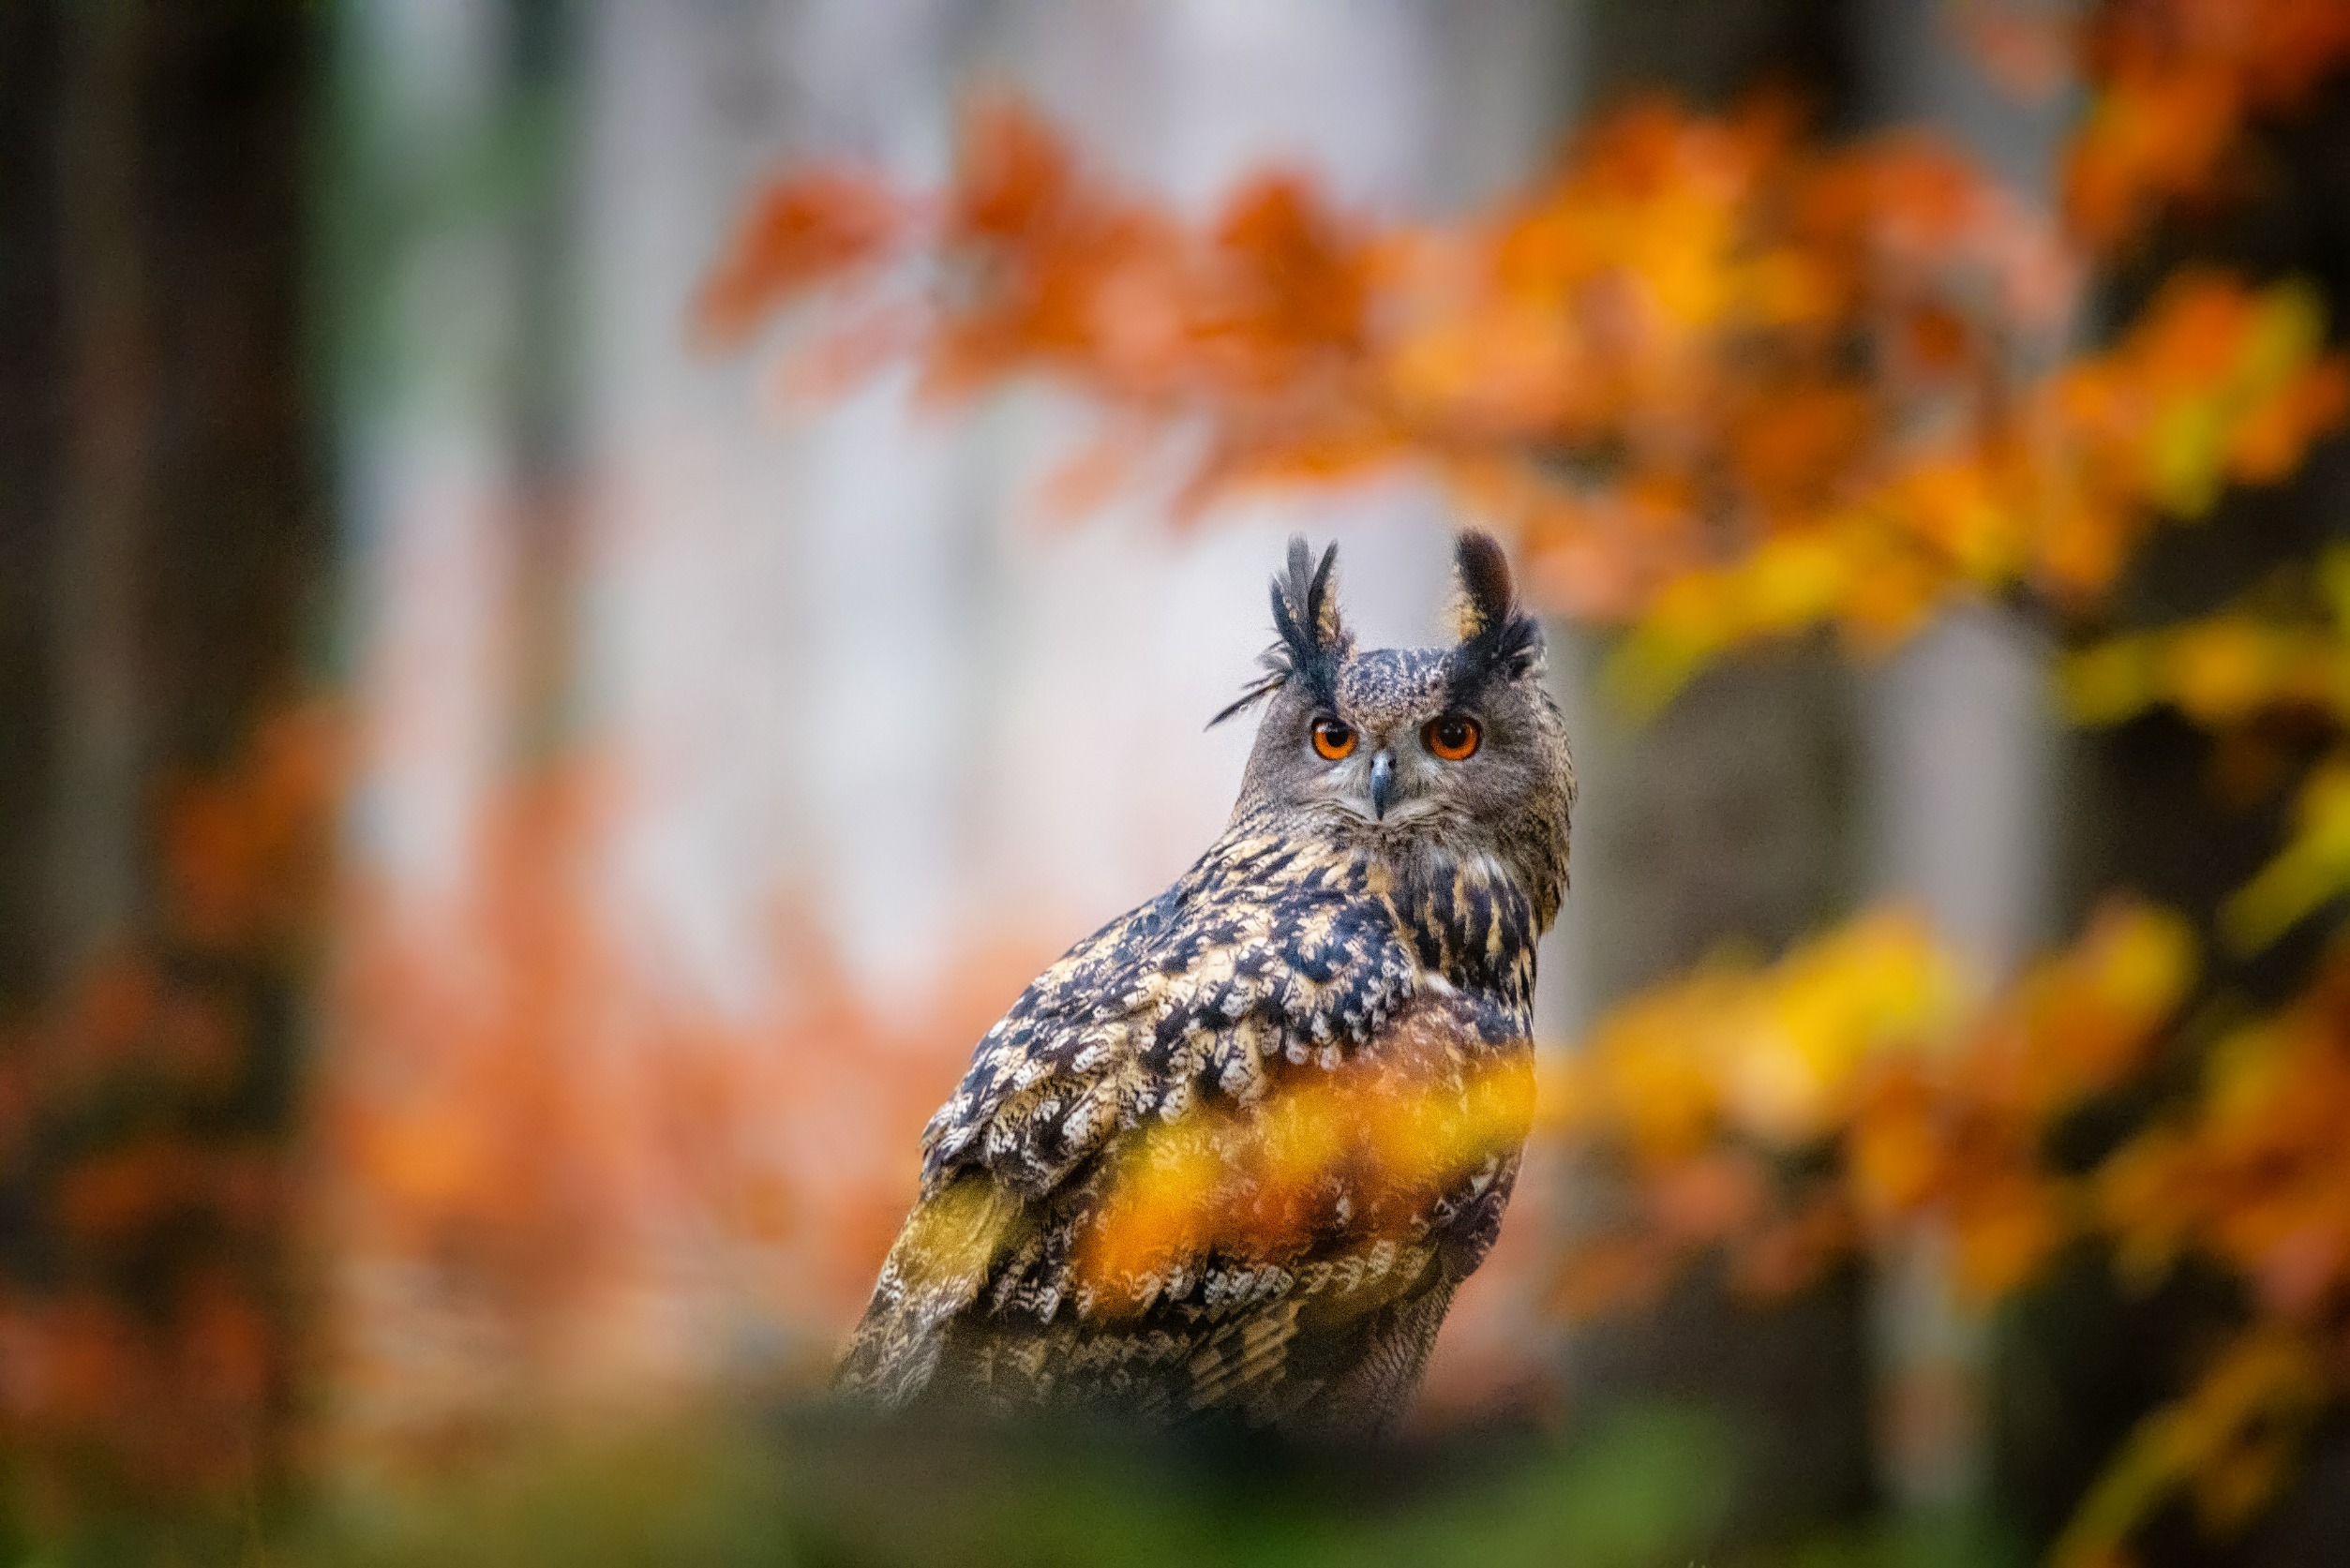 Large owl with perked ears in a forest with orange and yellow leaves. The background is lightly blurred.